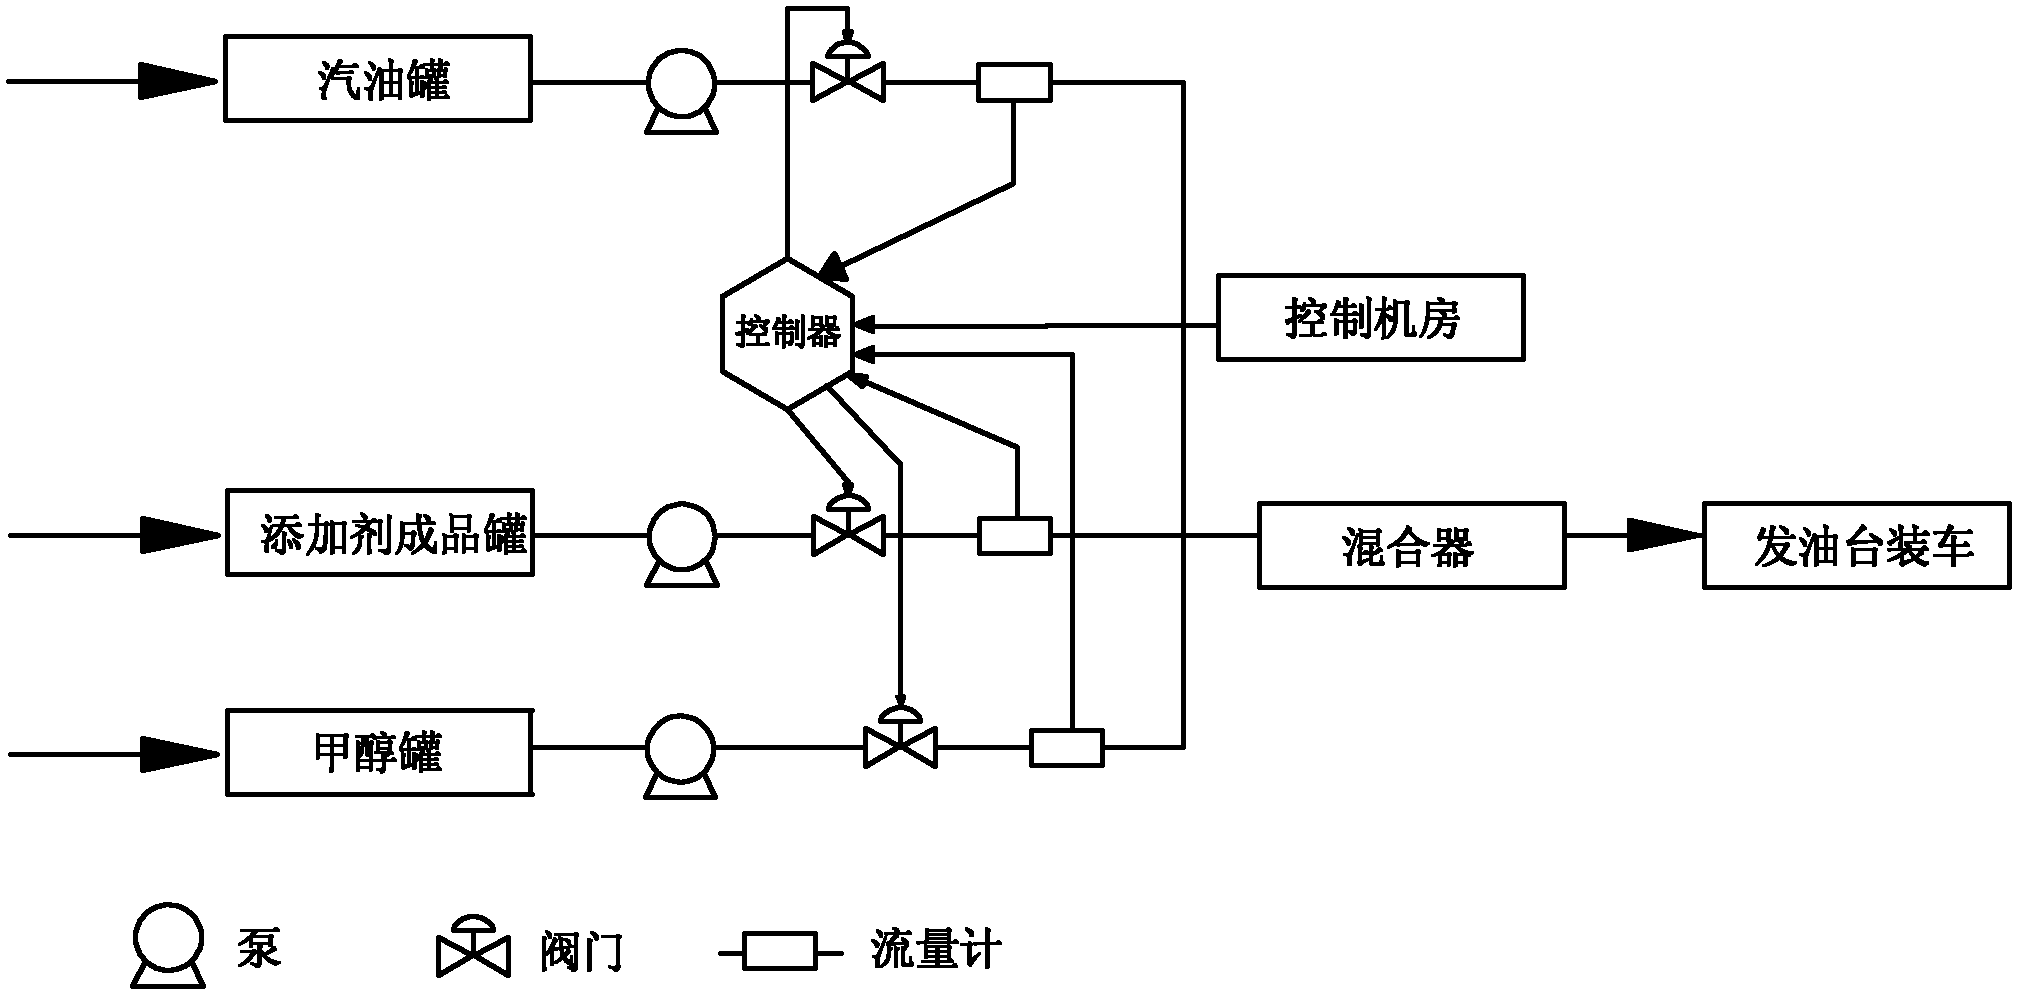 Production process and device of methanol gasoline